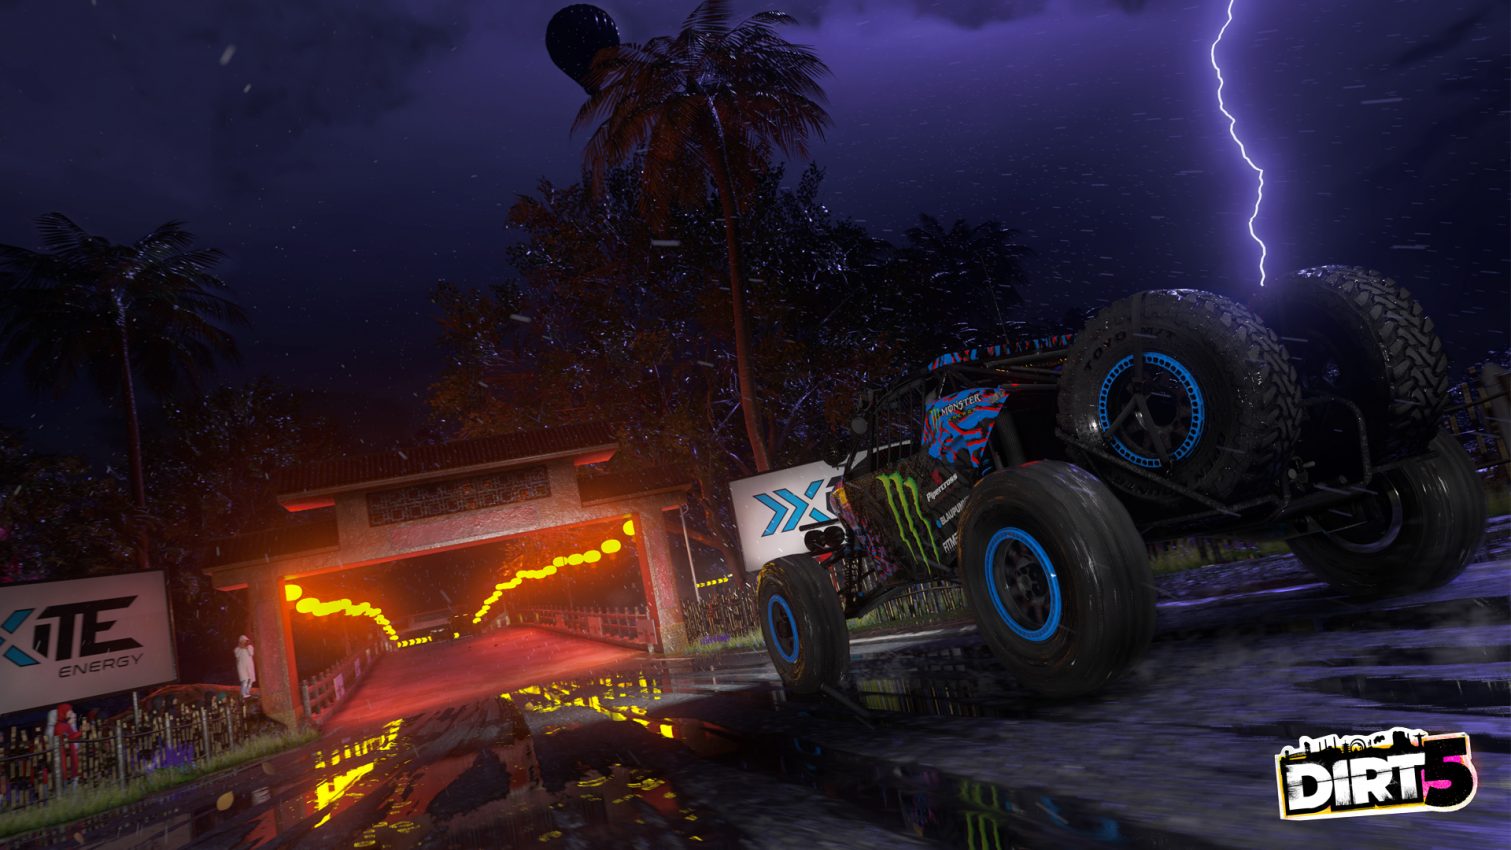 UK video game firm Codemasters plans to sell to Take-Two Interactive